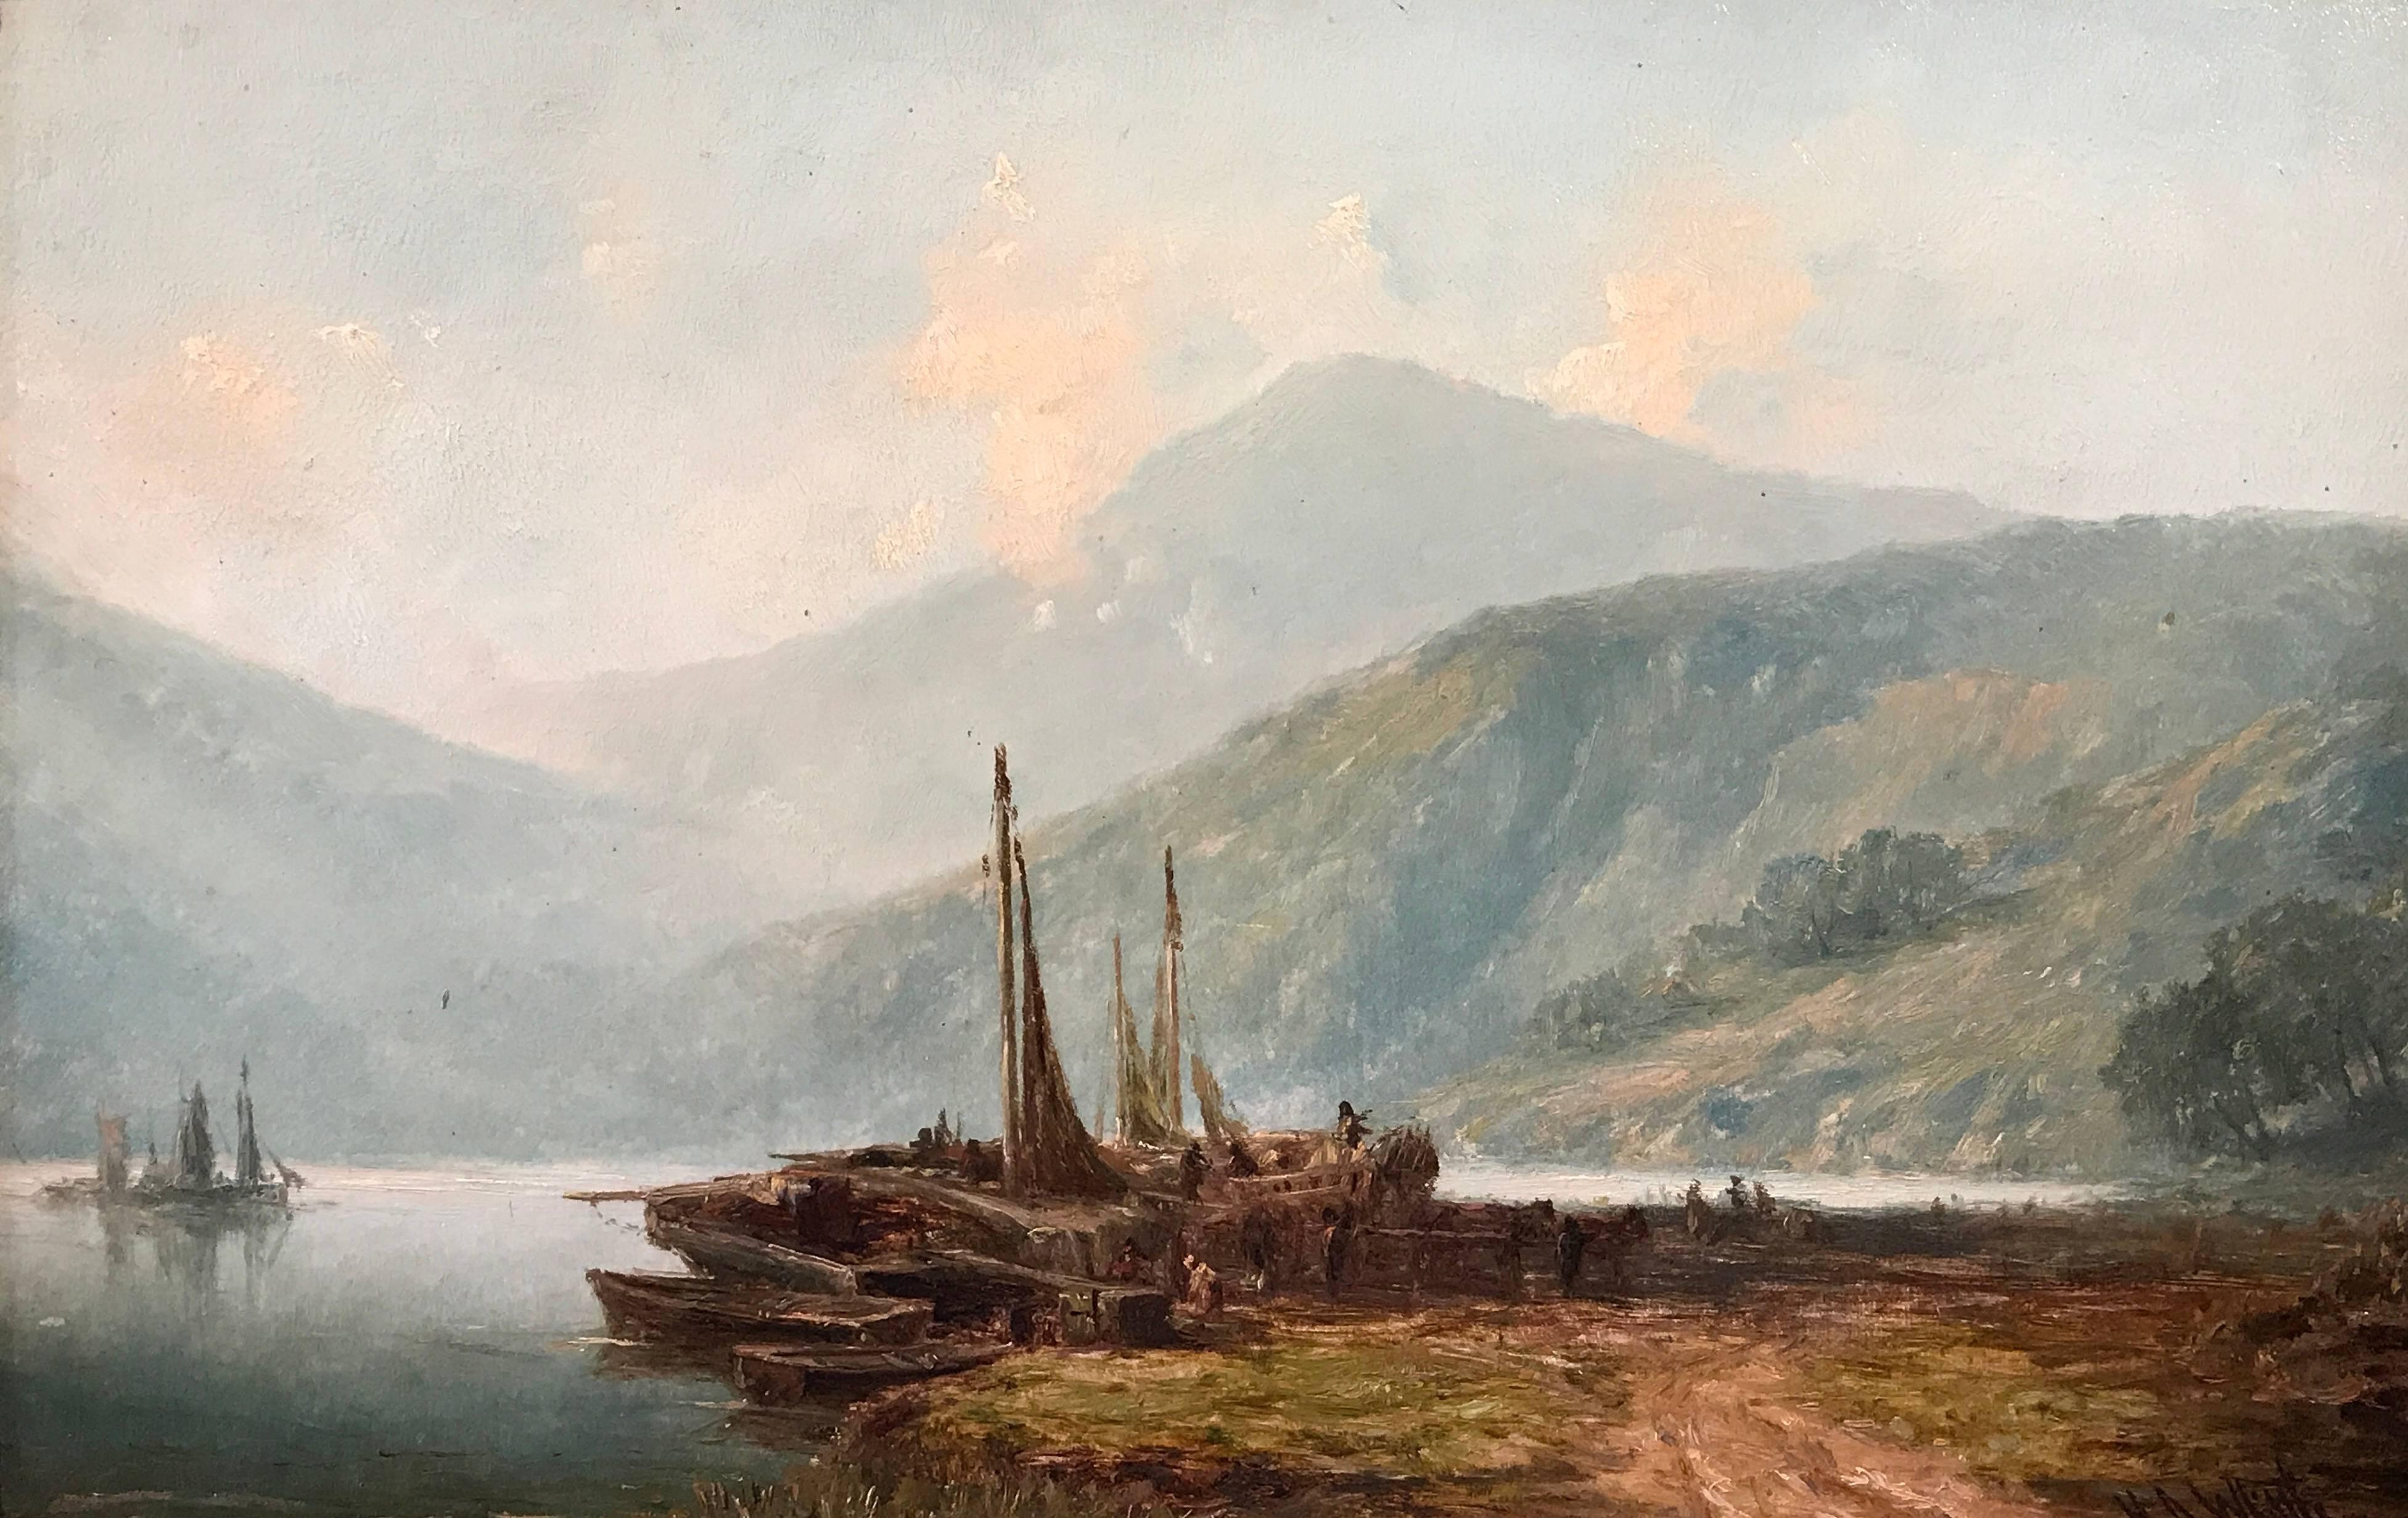 Harry Armstrong Whittle Landscape Painting - Loch Lomond Fishing Boats 19th Century Oil Painting